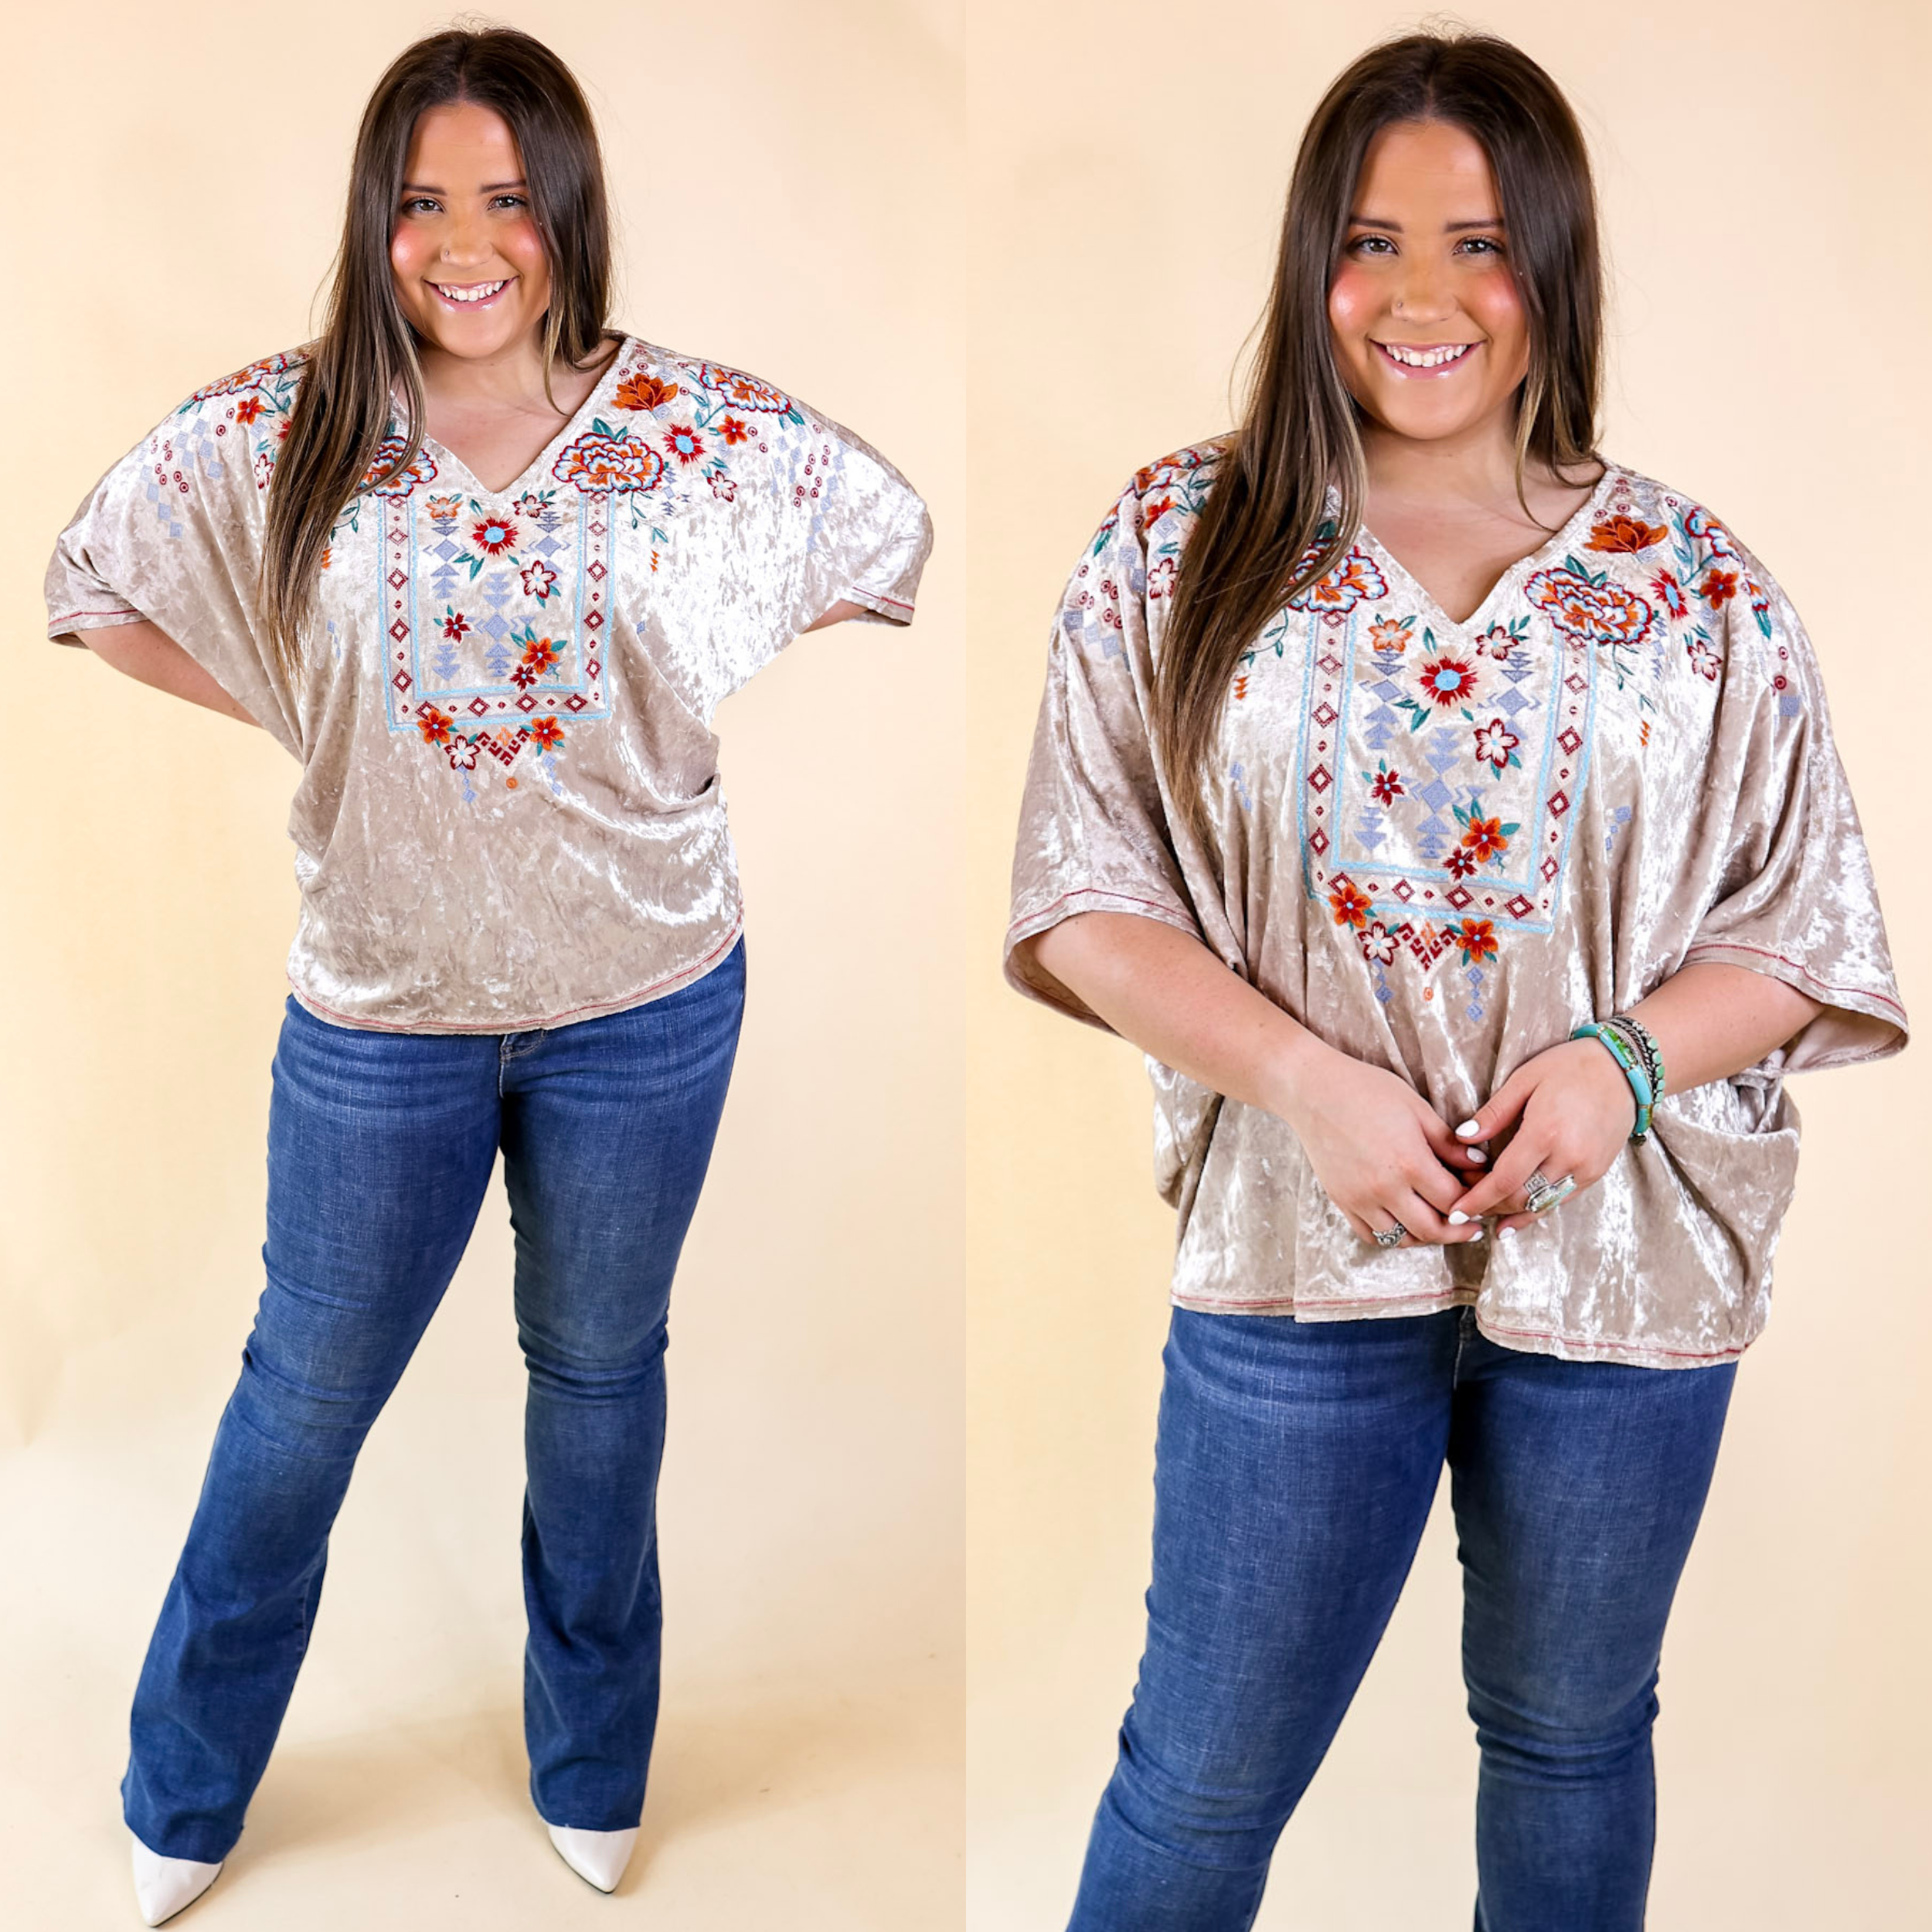 Forever Wanted Floral Embroidered Velvet Poncho Top in Oyster - Giddy Up Glamour Boutique